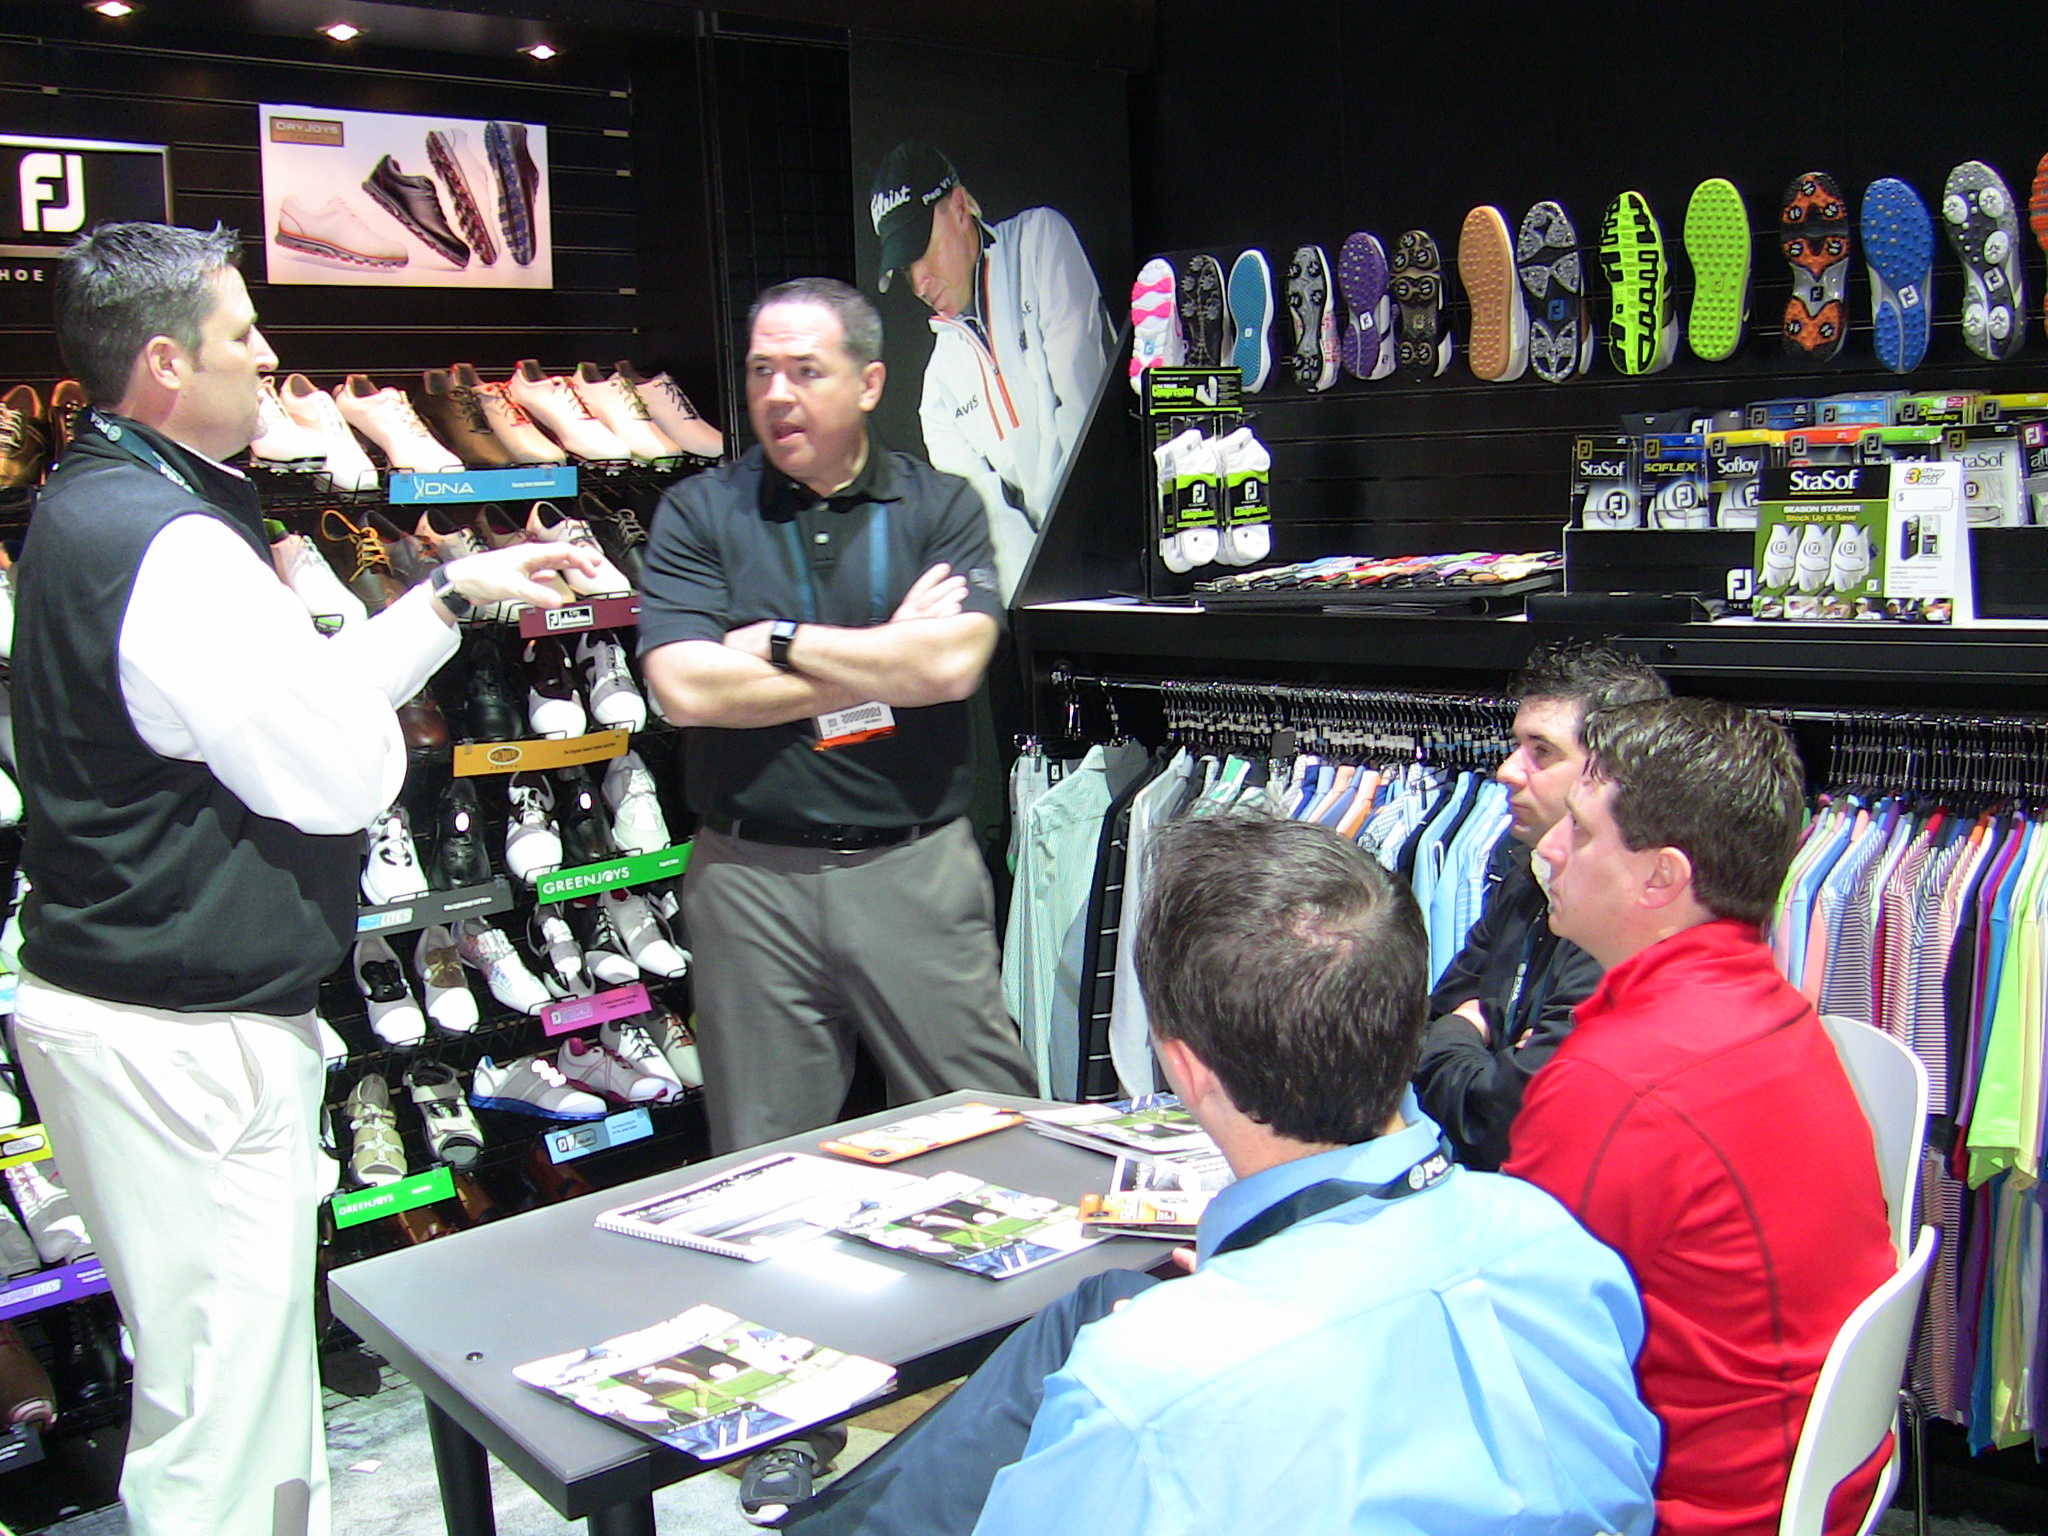 Tom Cox (center), president and CEO of Golfballs.com, and members of the Golfballs.com staff meet with a FootJoy representative during the PGA Merchandise Show, looking at the newest line of FootJoy's golf apparel.